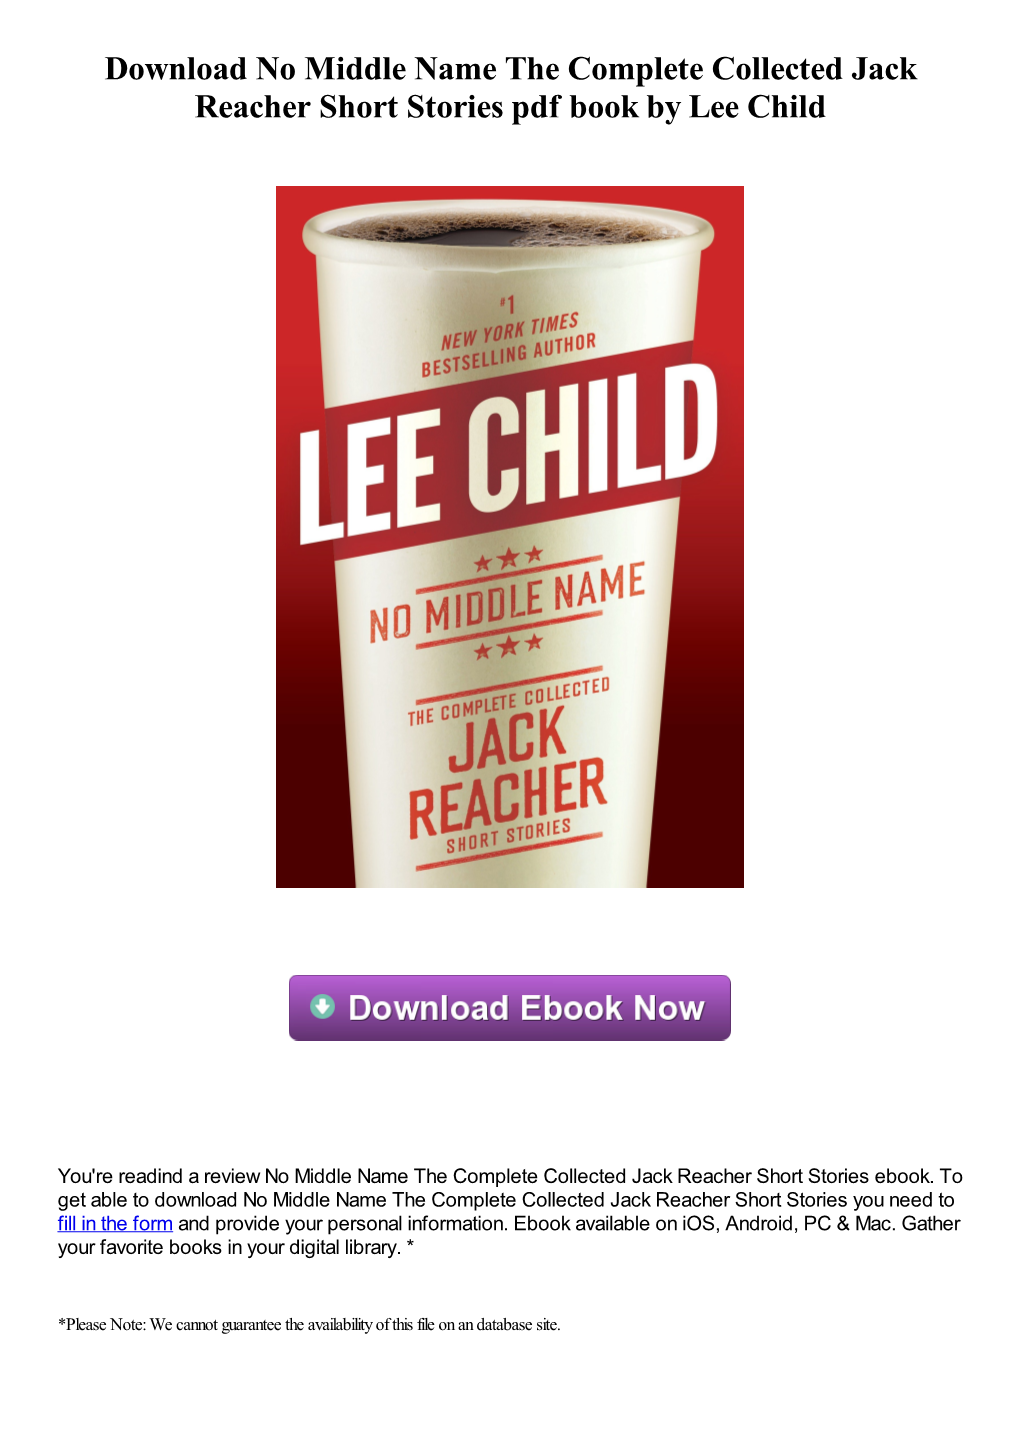 Download No Middle Name the Complete Collected Jack Reacher Short Stories Pdf Book by Lee Child